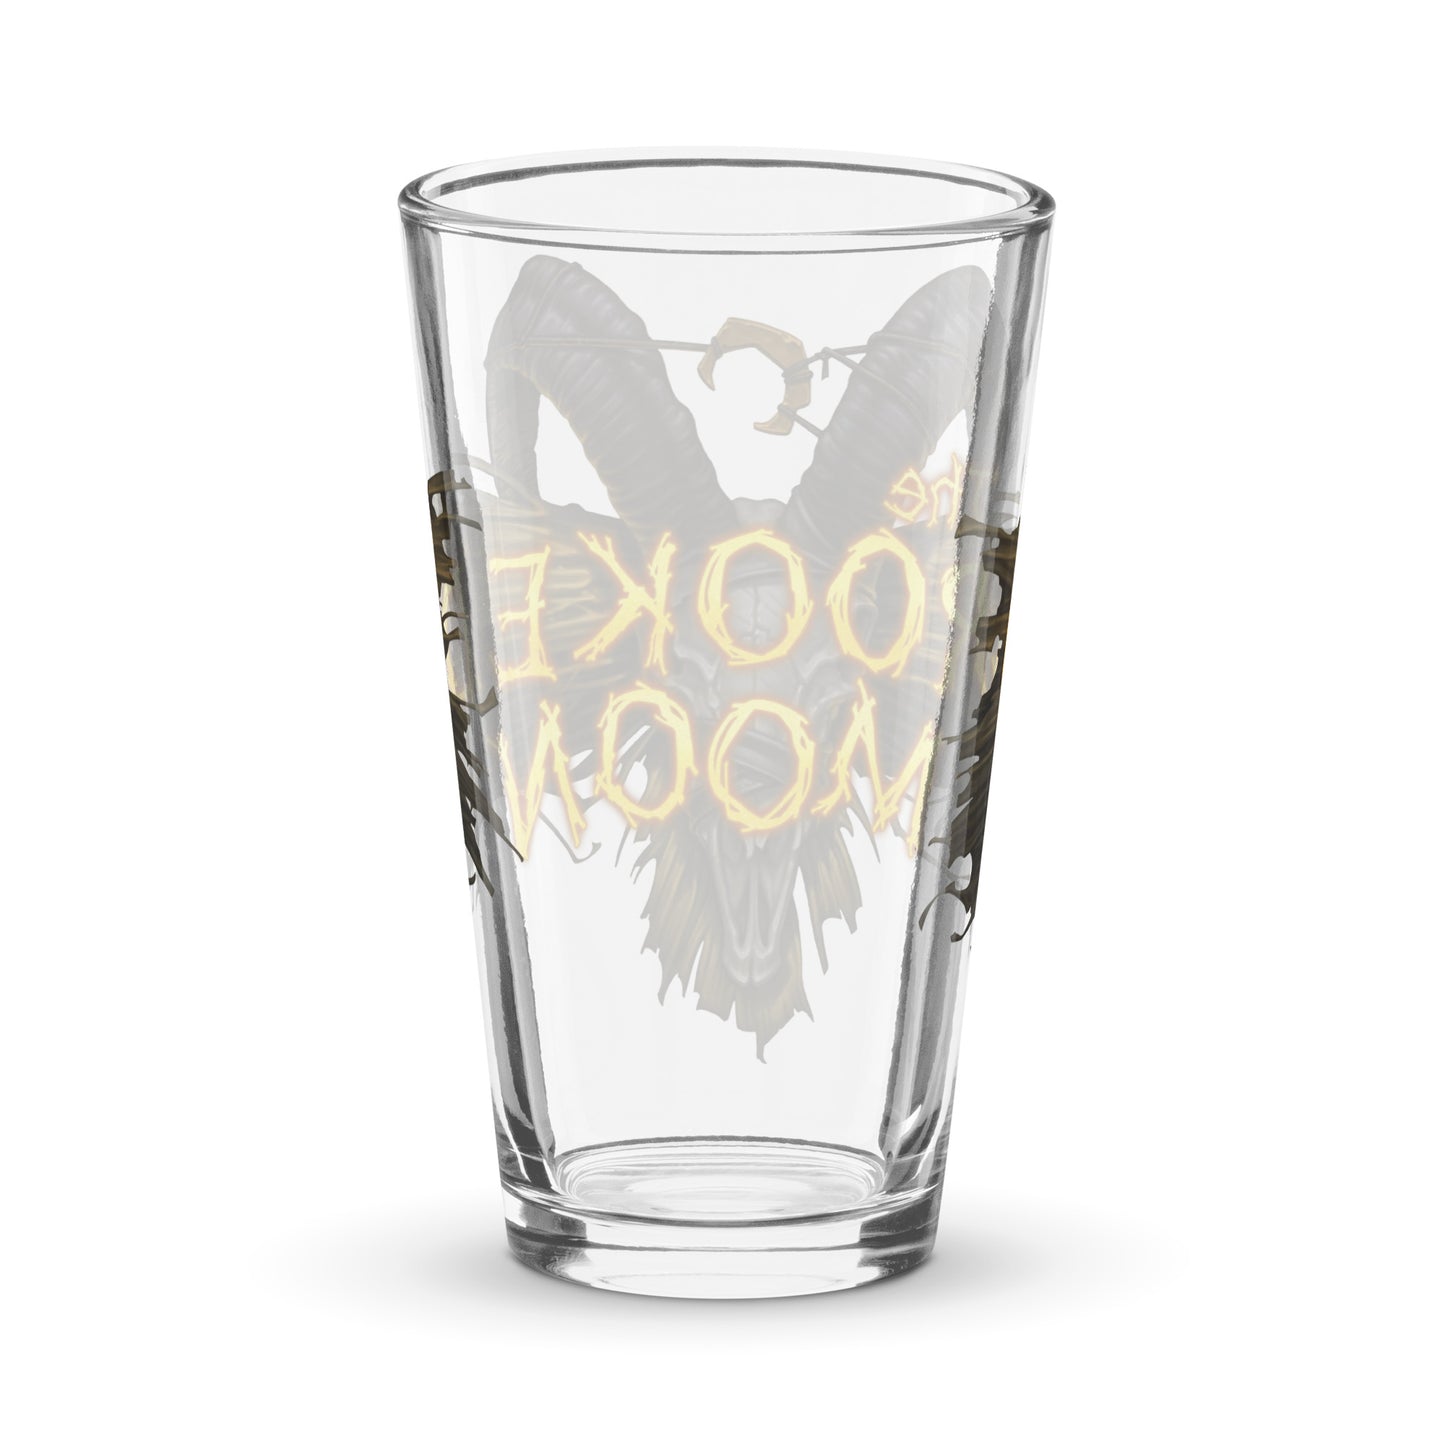 The Crooked Moon - Shaker pint glass